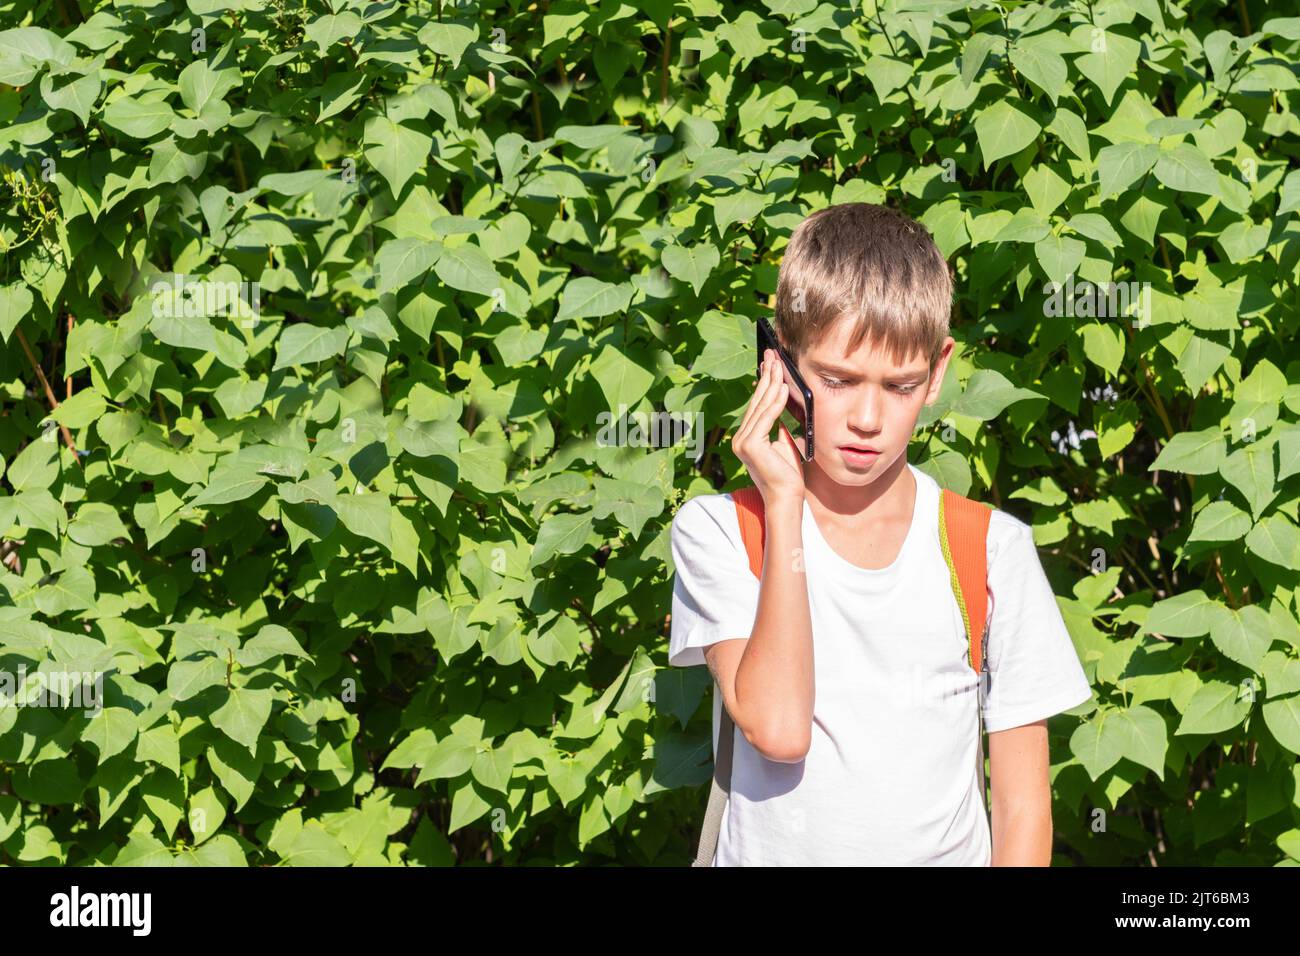 Portrait of a happy schoolboy with a backpack using a smartphone, talking on the phone on the street on a green background of leaves, copy space. The Stock Photo